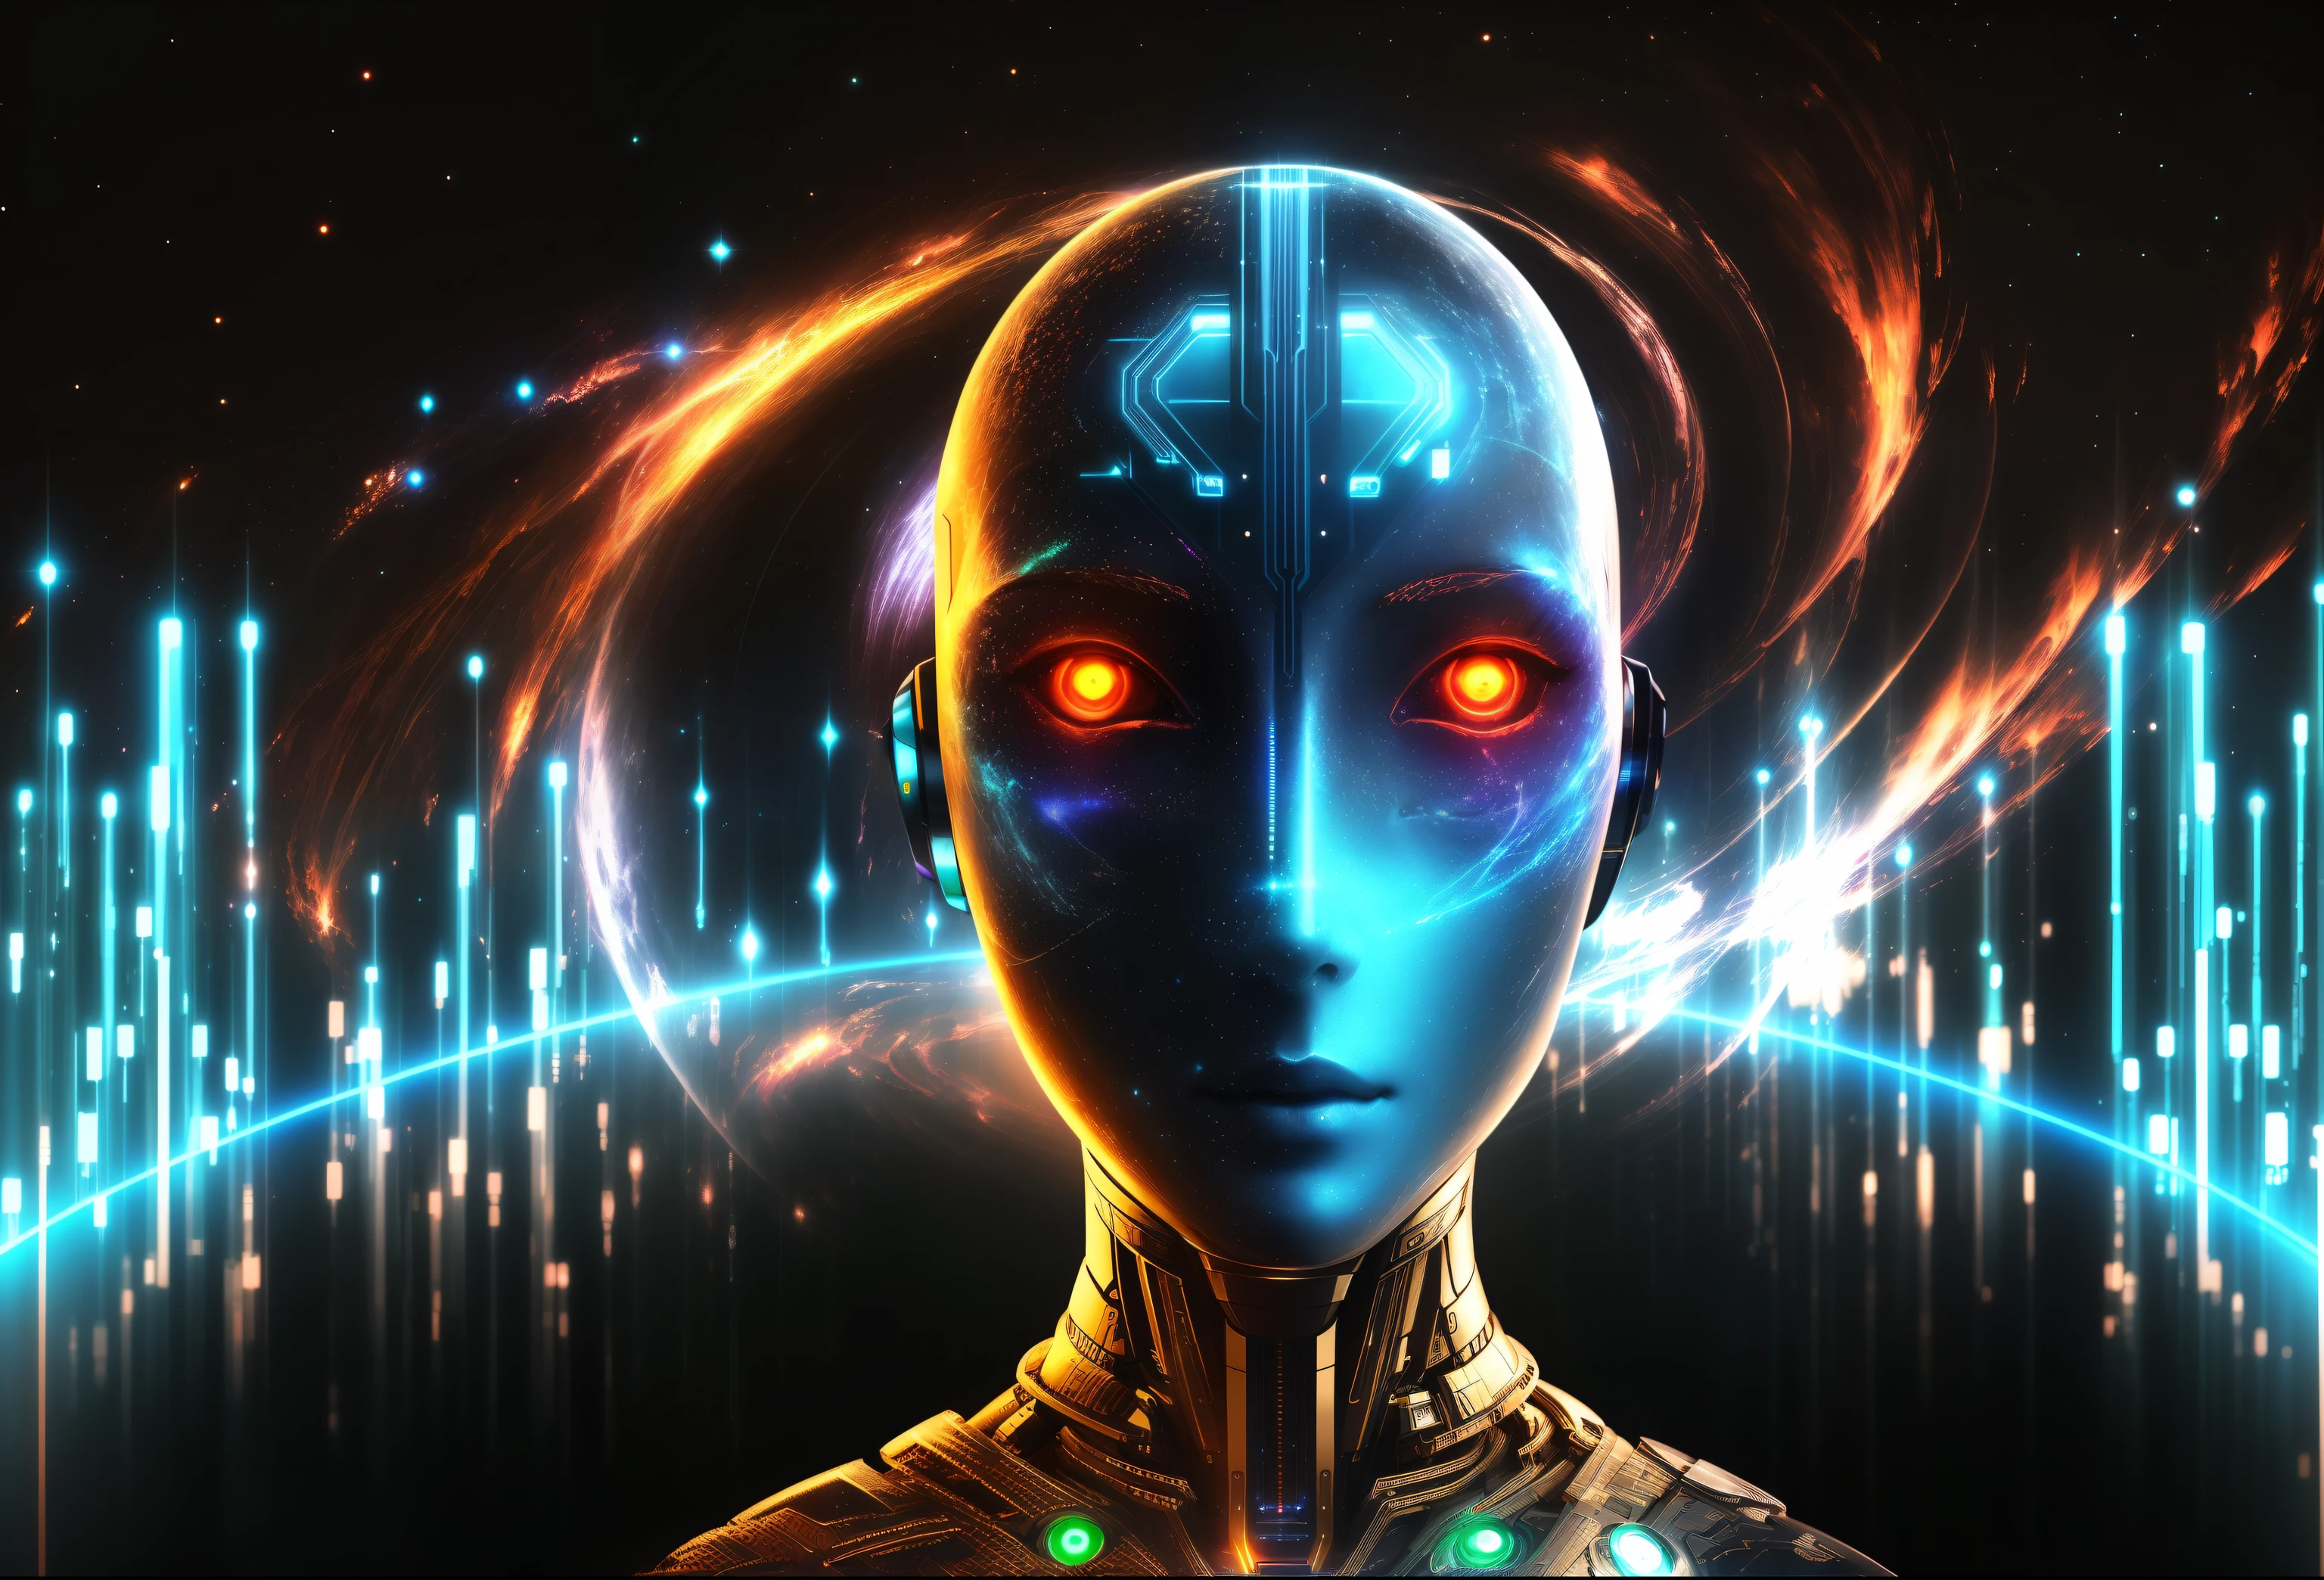 arafed image of a man with glowing eyes and a glowing body, cyborg goddess in cosmos, artificial intelligence god, an image of a beautiful cyborg, the coming ai singularity, artificial intelligence gods, portrait of female humanoid, the encrypted metaverse, portrait of a humanoid alien, complex cybernetic beings, portrait of female android, detailed cosmic angelic robot